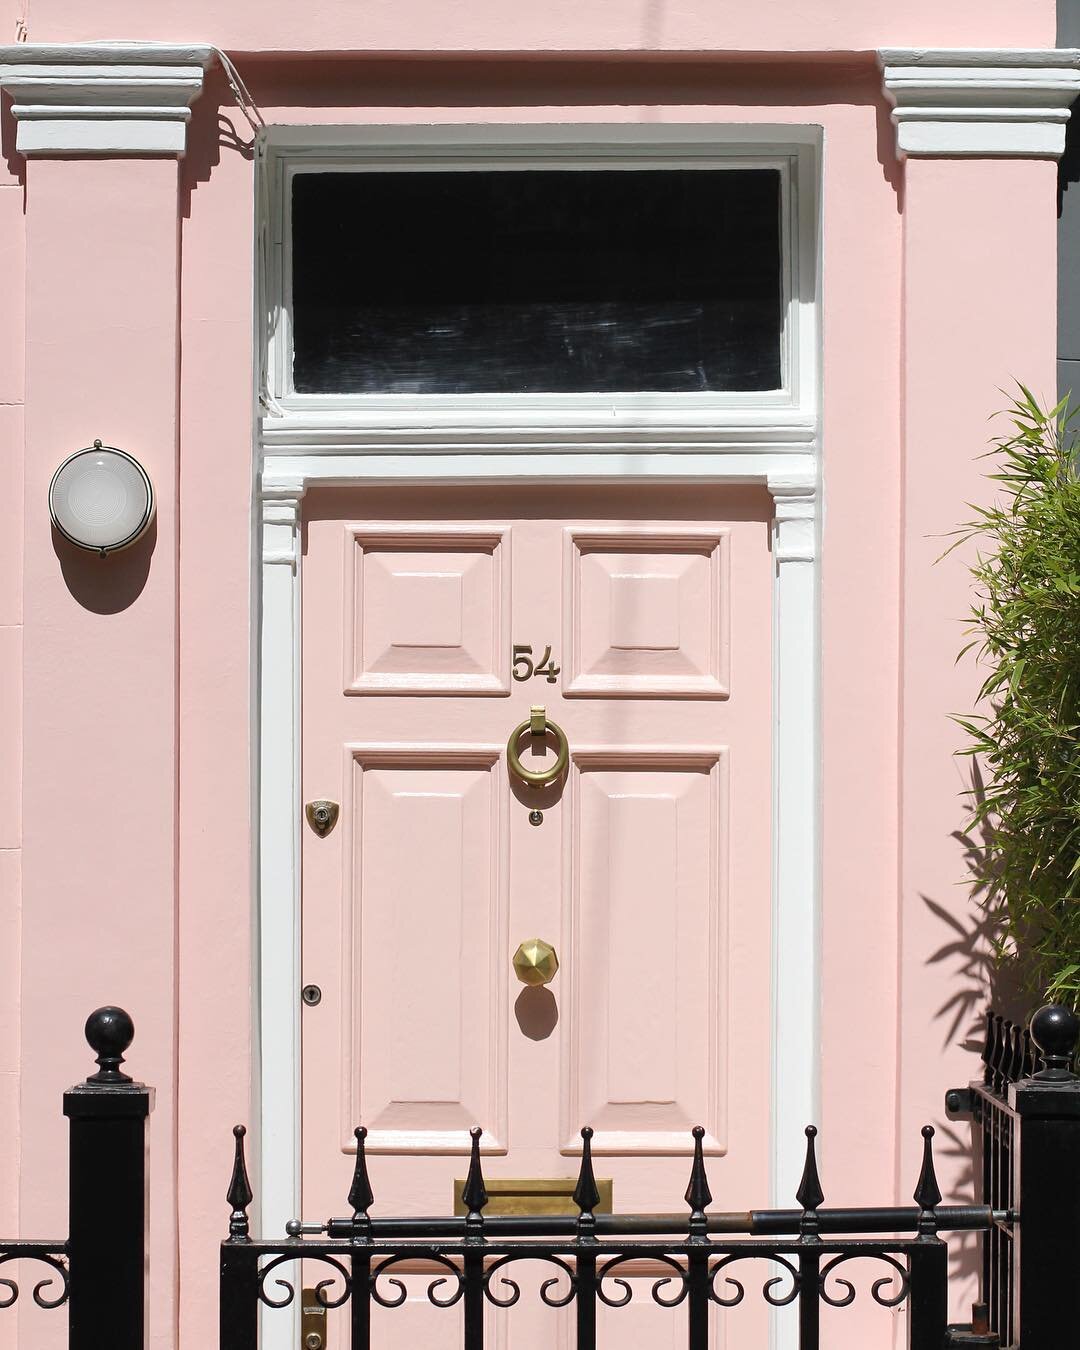 l o n d o n &bull;
&bull;
&bull;
&bull;
&bull;
&bull;
&bull;
&bull;
#candycolor #throwbackthursday #pink #mood #pinkdoor #london #travelphotography #travelpost #candycoated #candyminimal #pinkcity #uk #canon #travel #visitlondon #londontourism